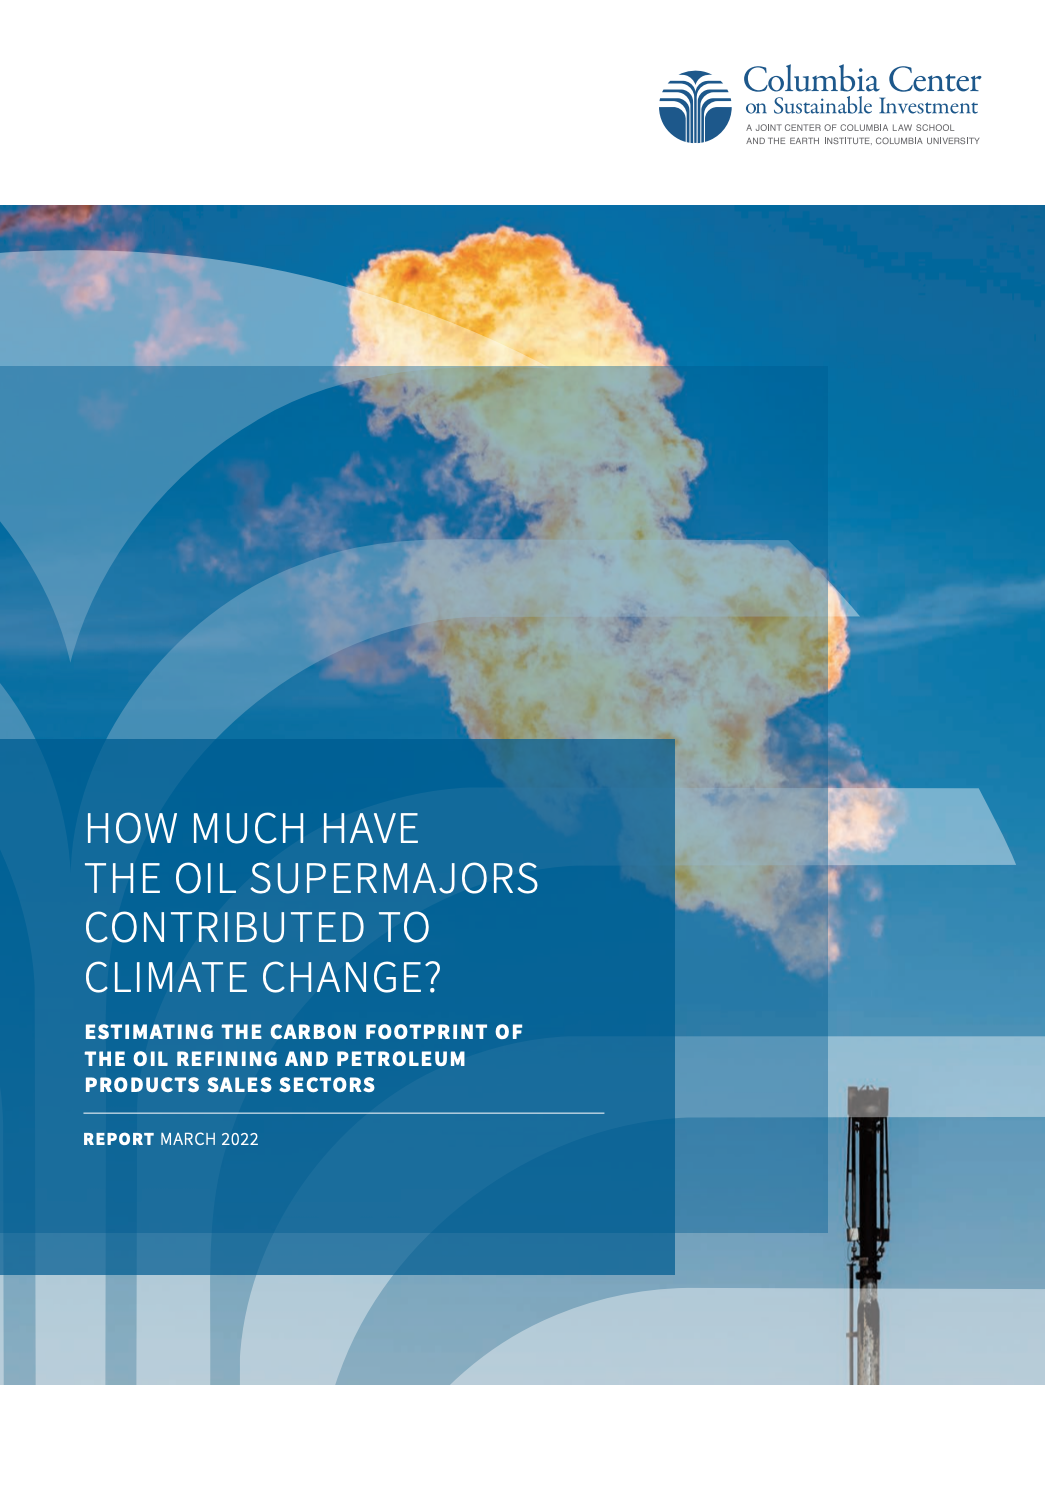 "How Much Have the Oil Supermajors Contributed to Climate Change?" publication cover